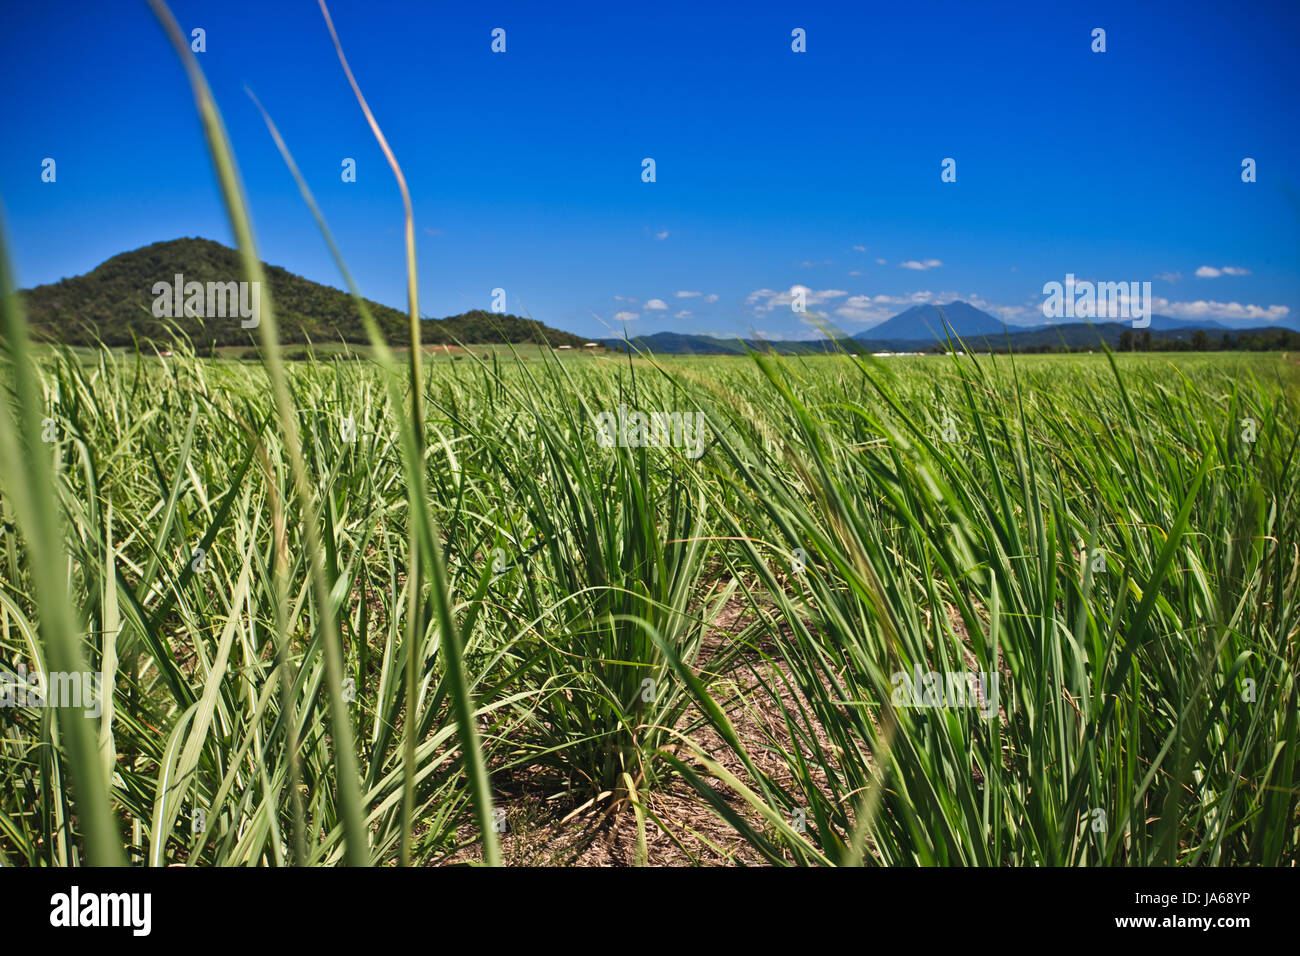 mountains, scene, location, site, nature, hut, home, blue, house, building, Stock Photo